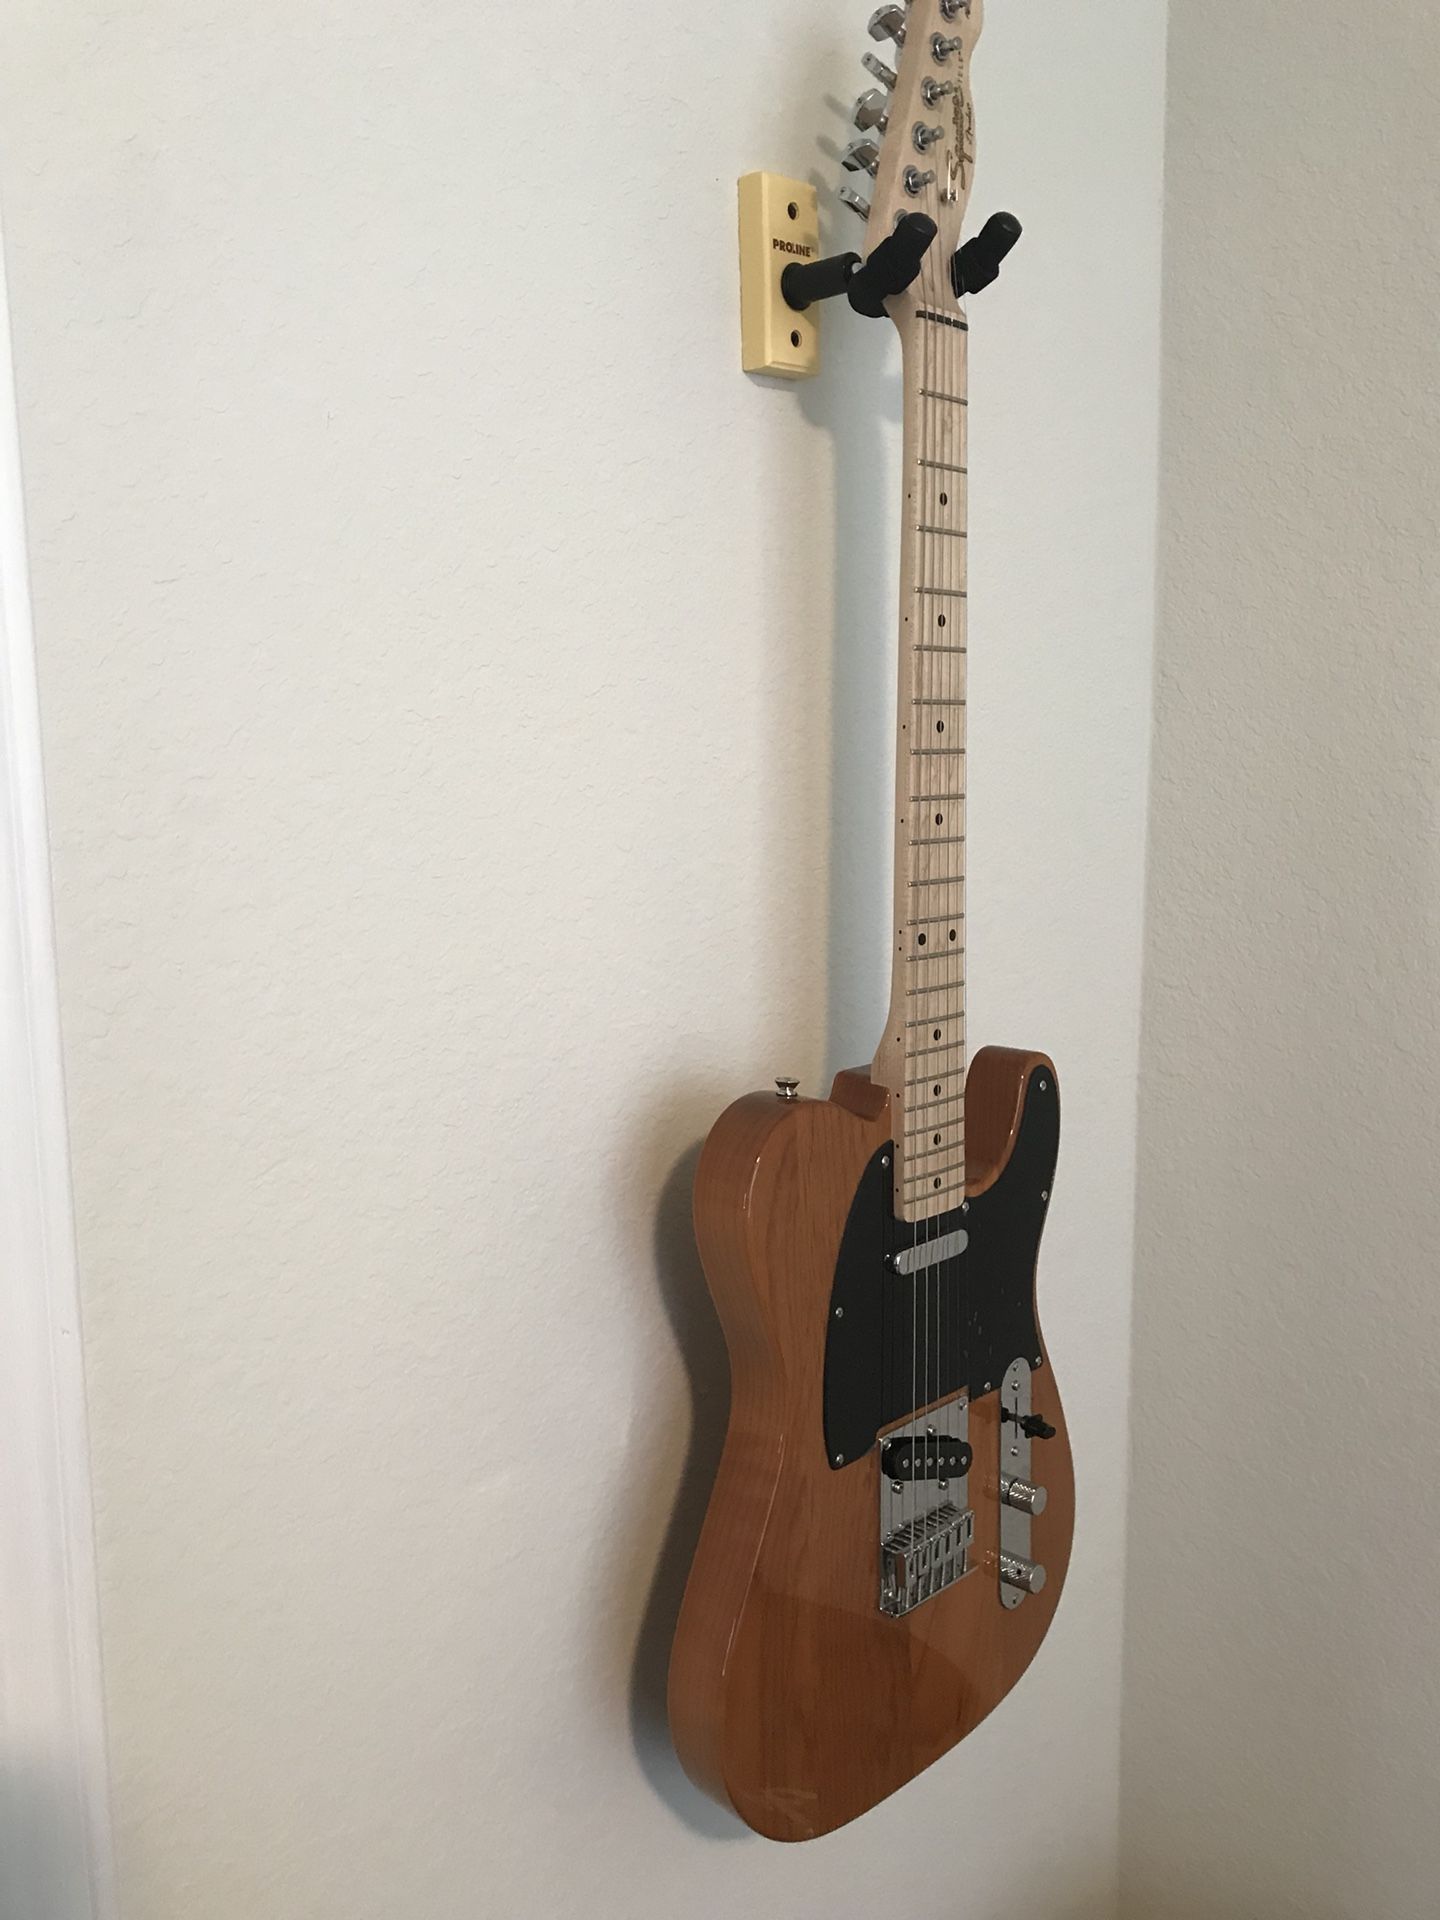 Fender Squire Telecaster Electric Guitar with amp